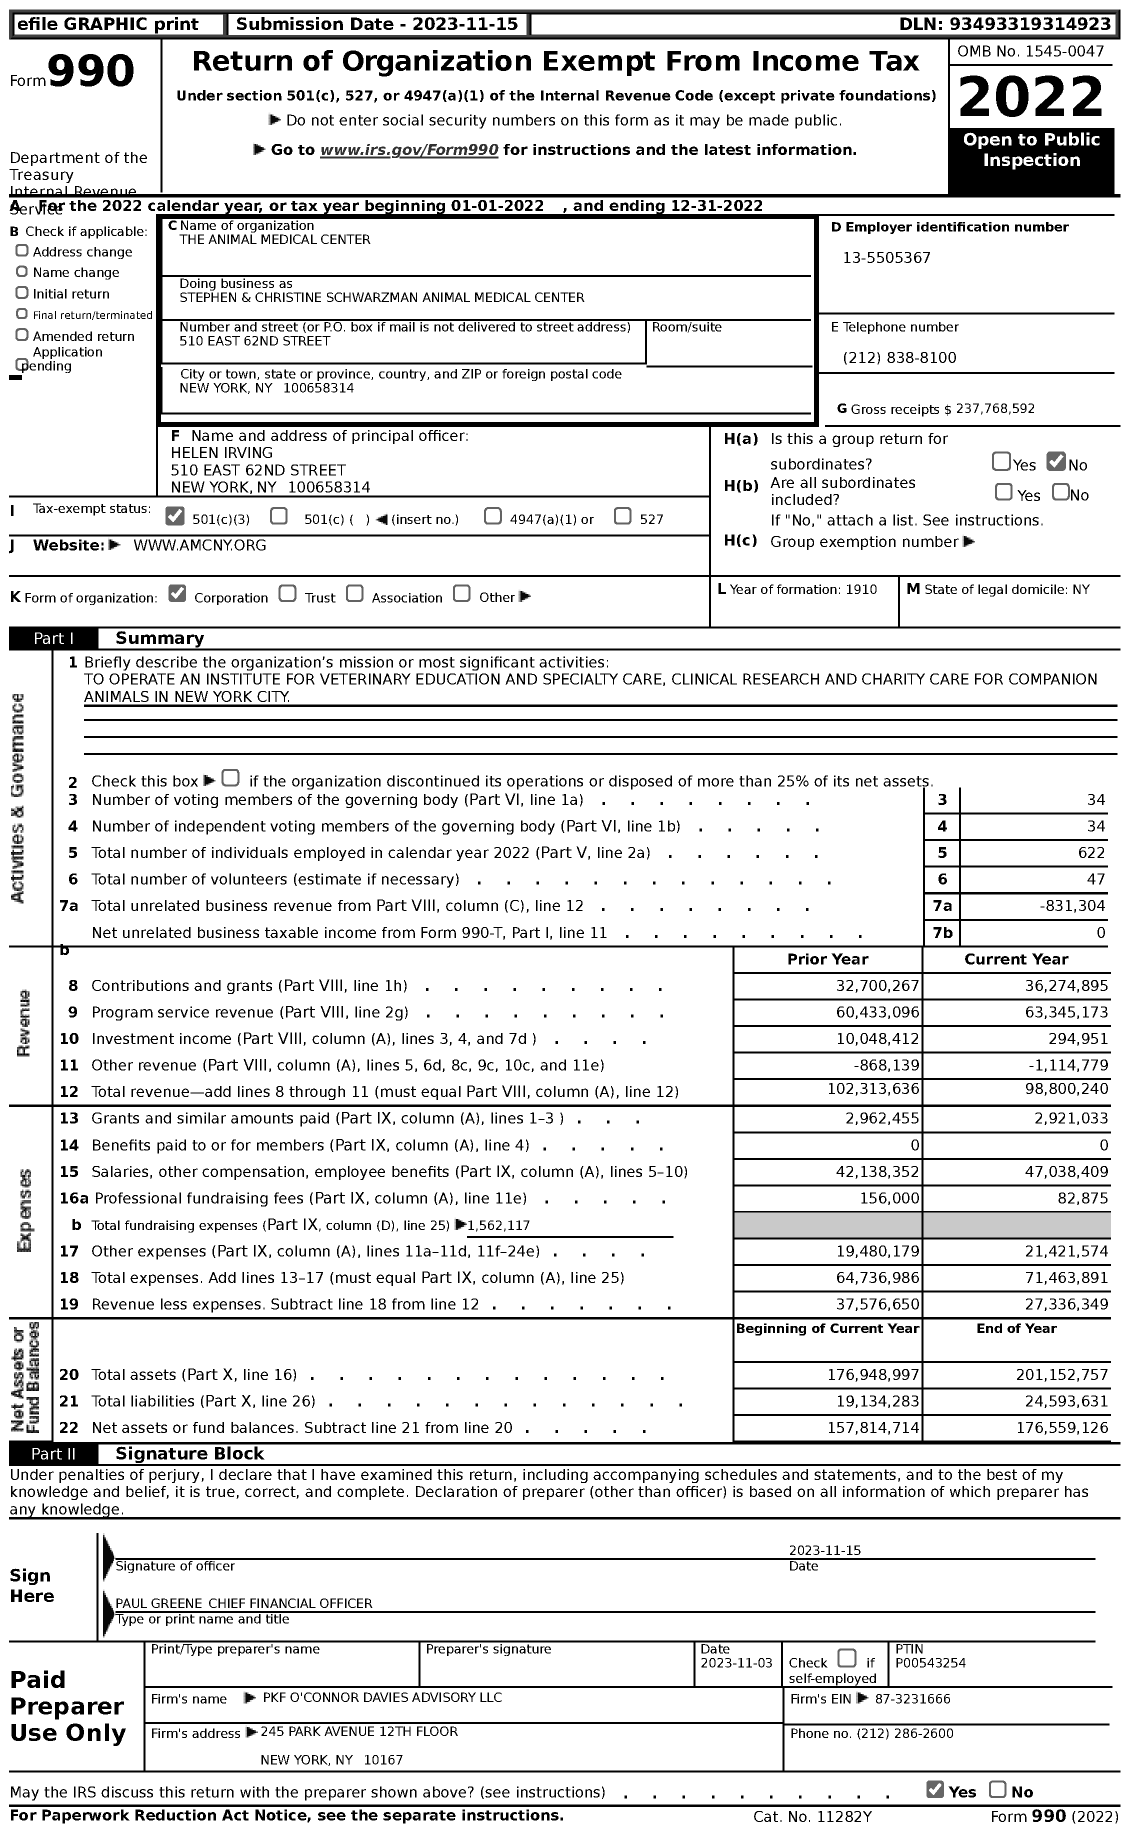 Image of first page of 2022 Form 990 for Stephen and Christine Schwarzman Animal Medical Center (AMC)